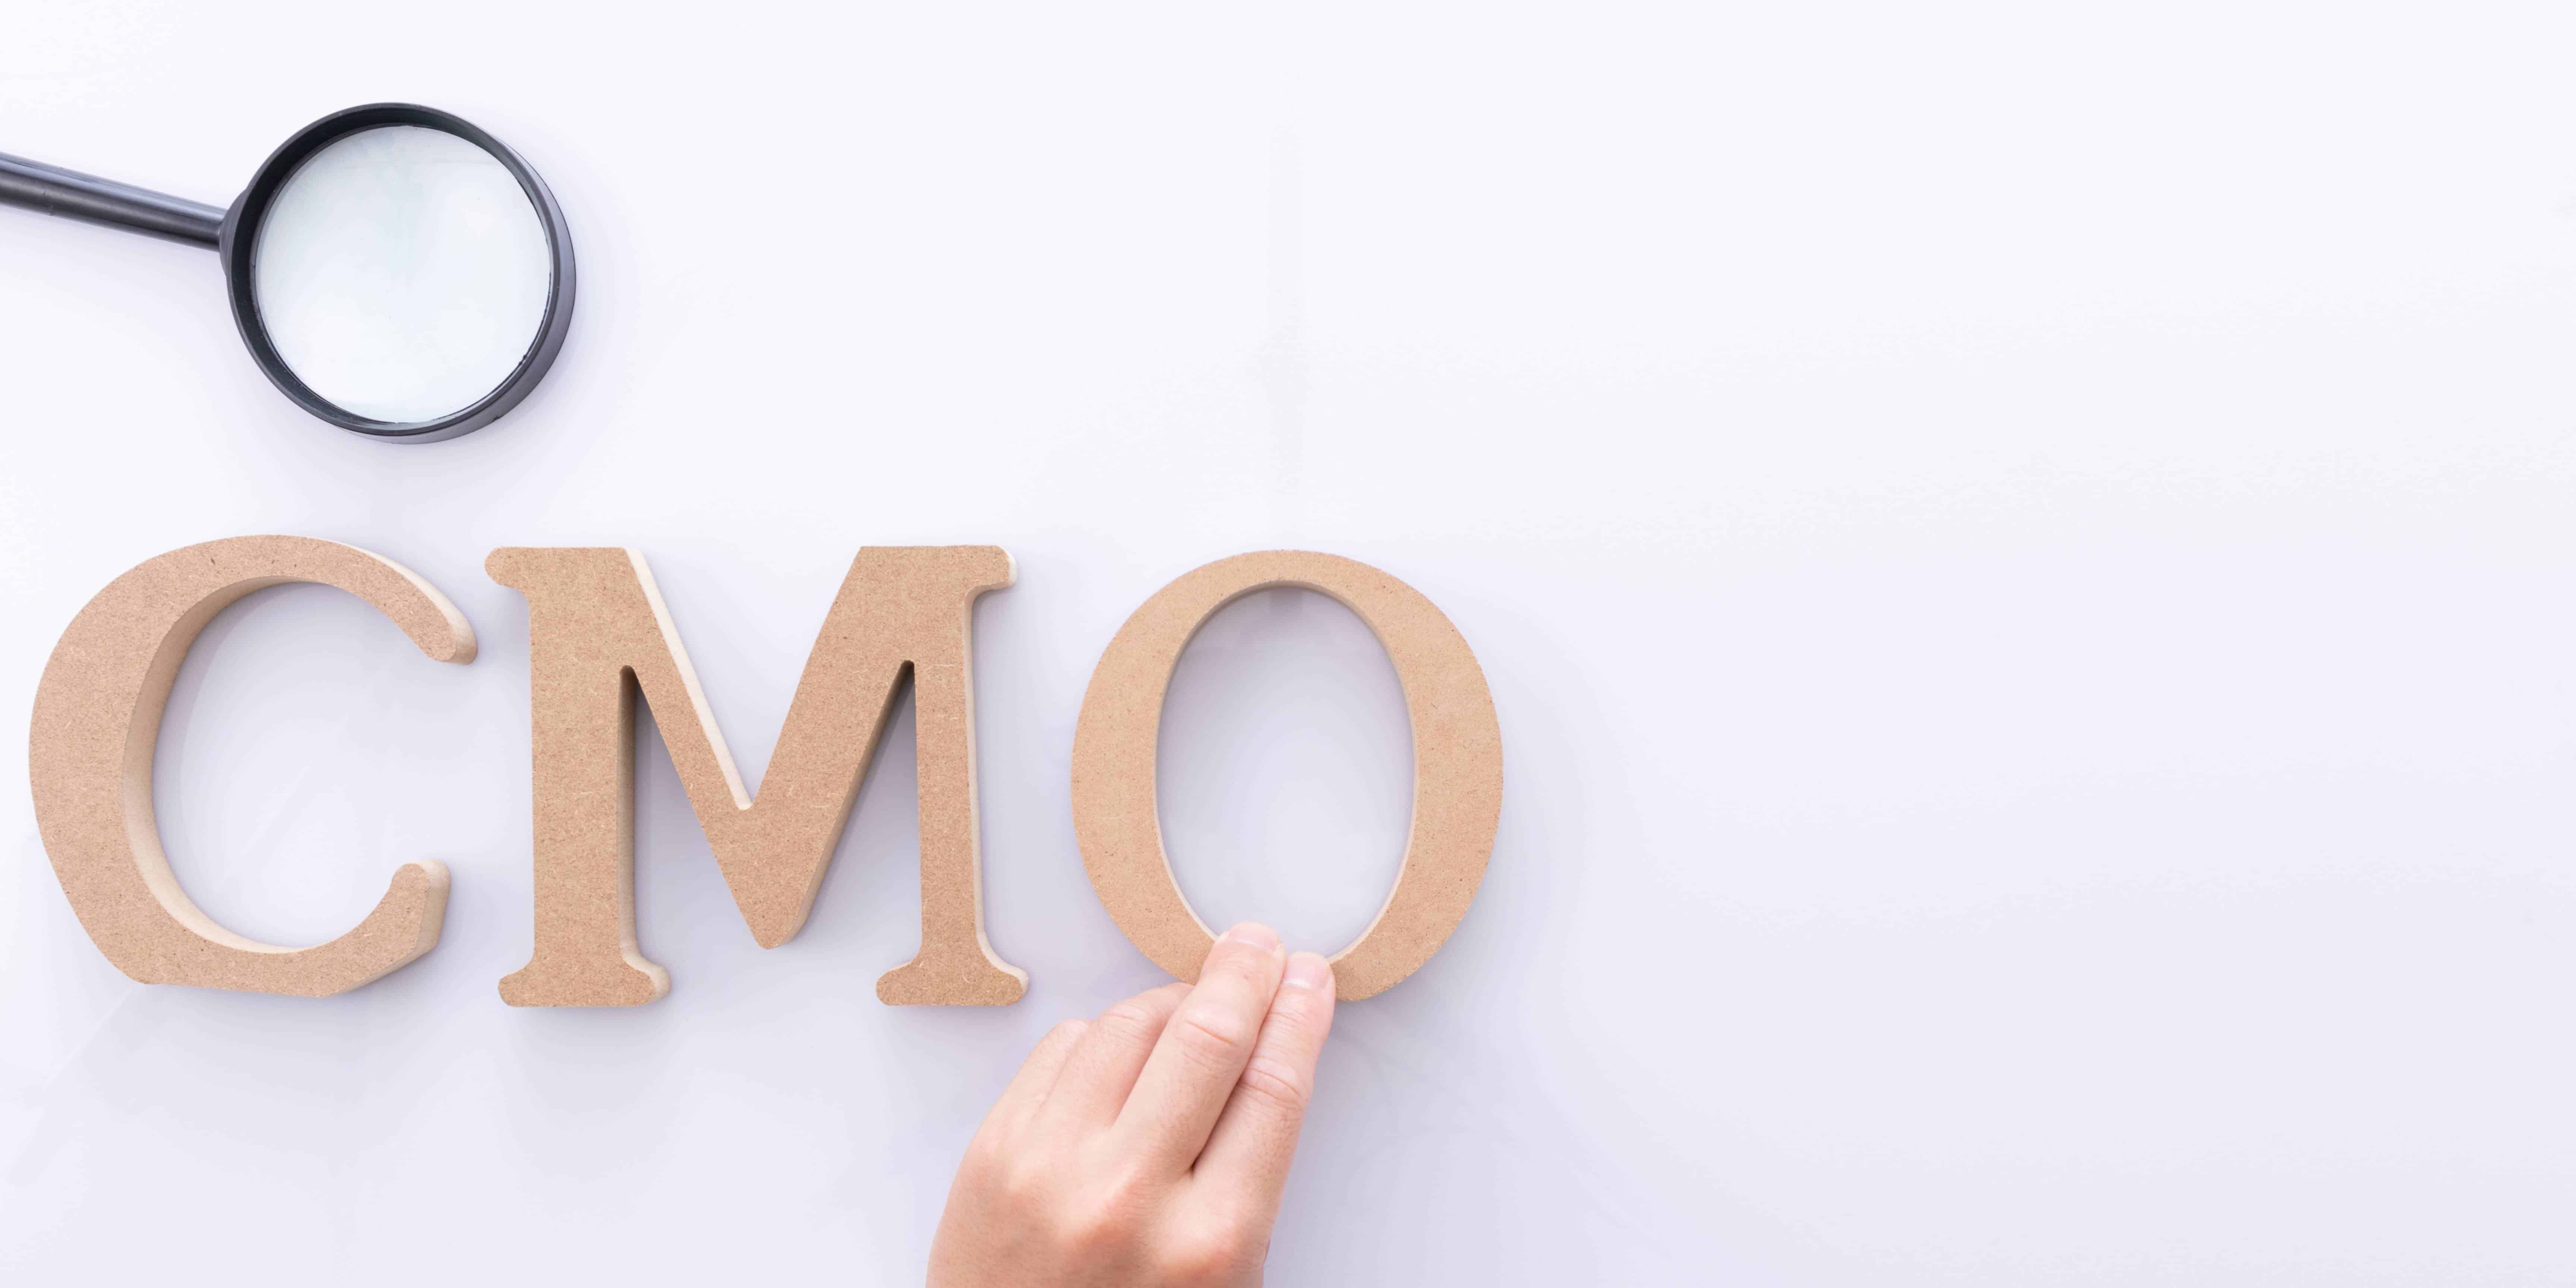 What Does CMO Stand For?